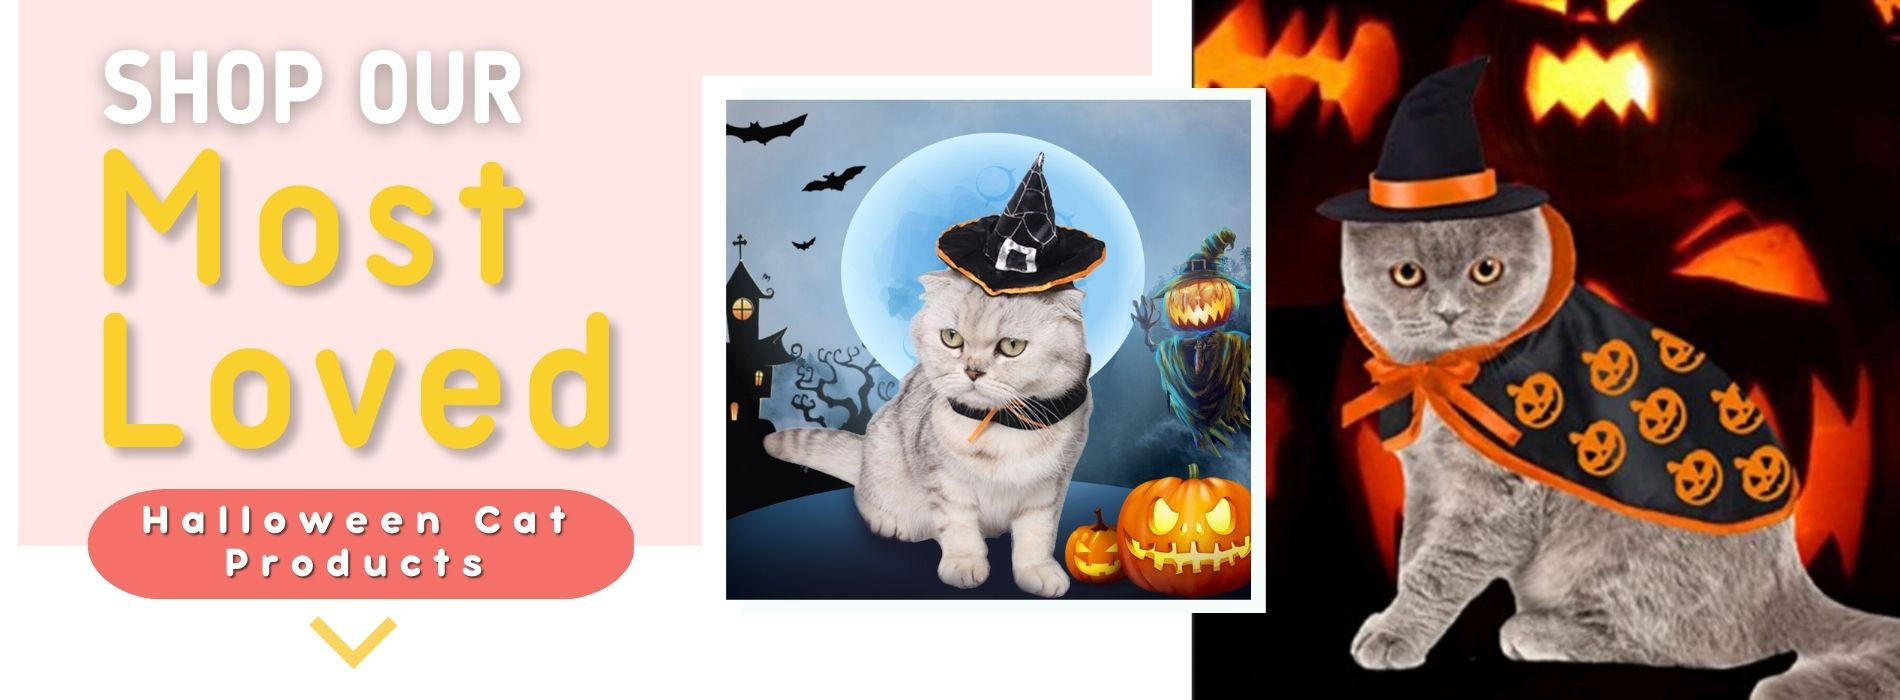 halloween-cat-products-gifts